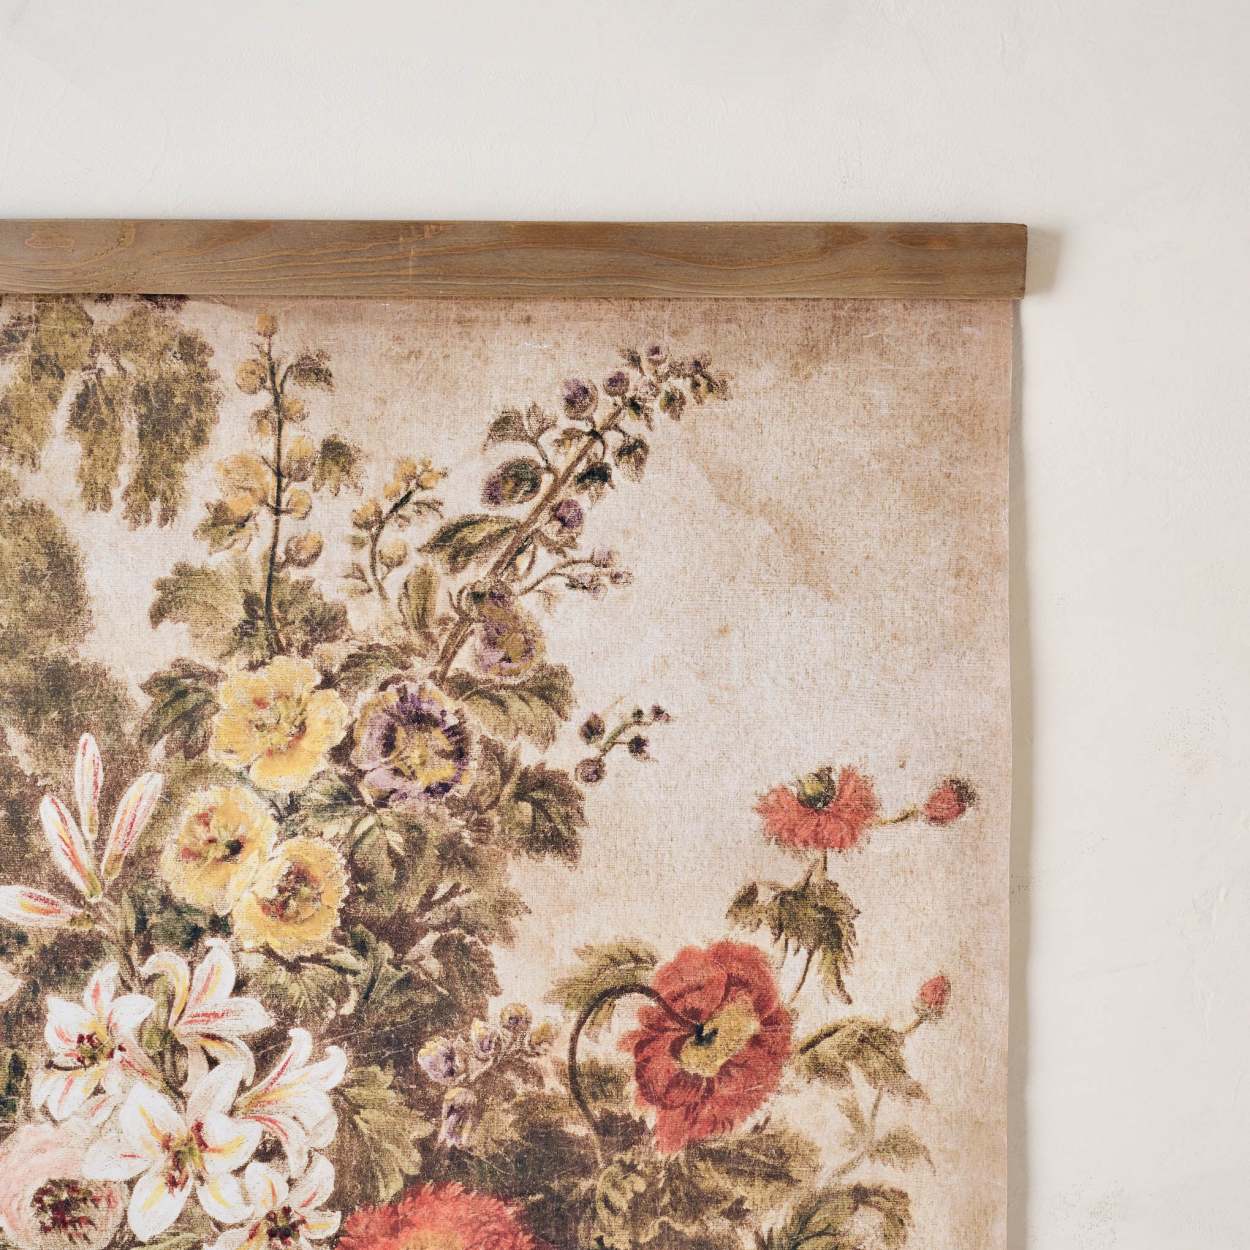 1930s Floral Setting tapestry - Only 1 left!